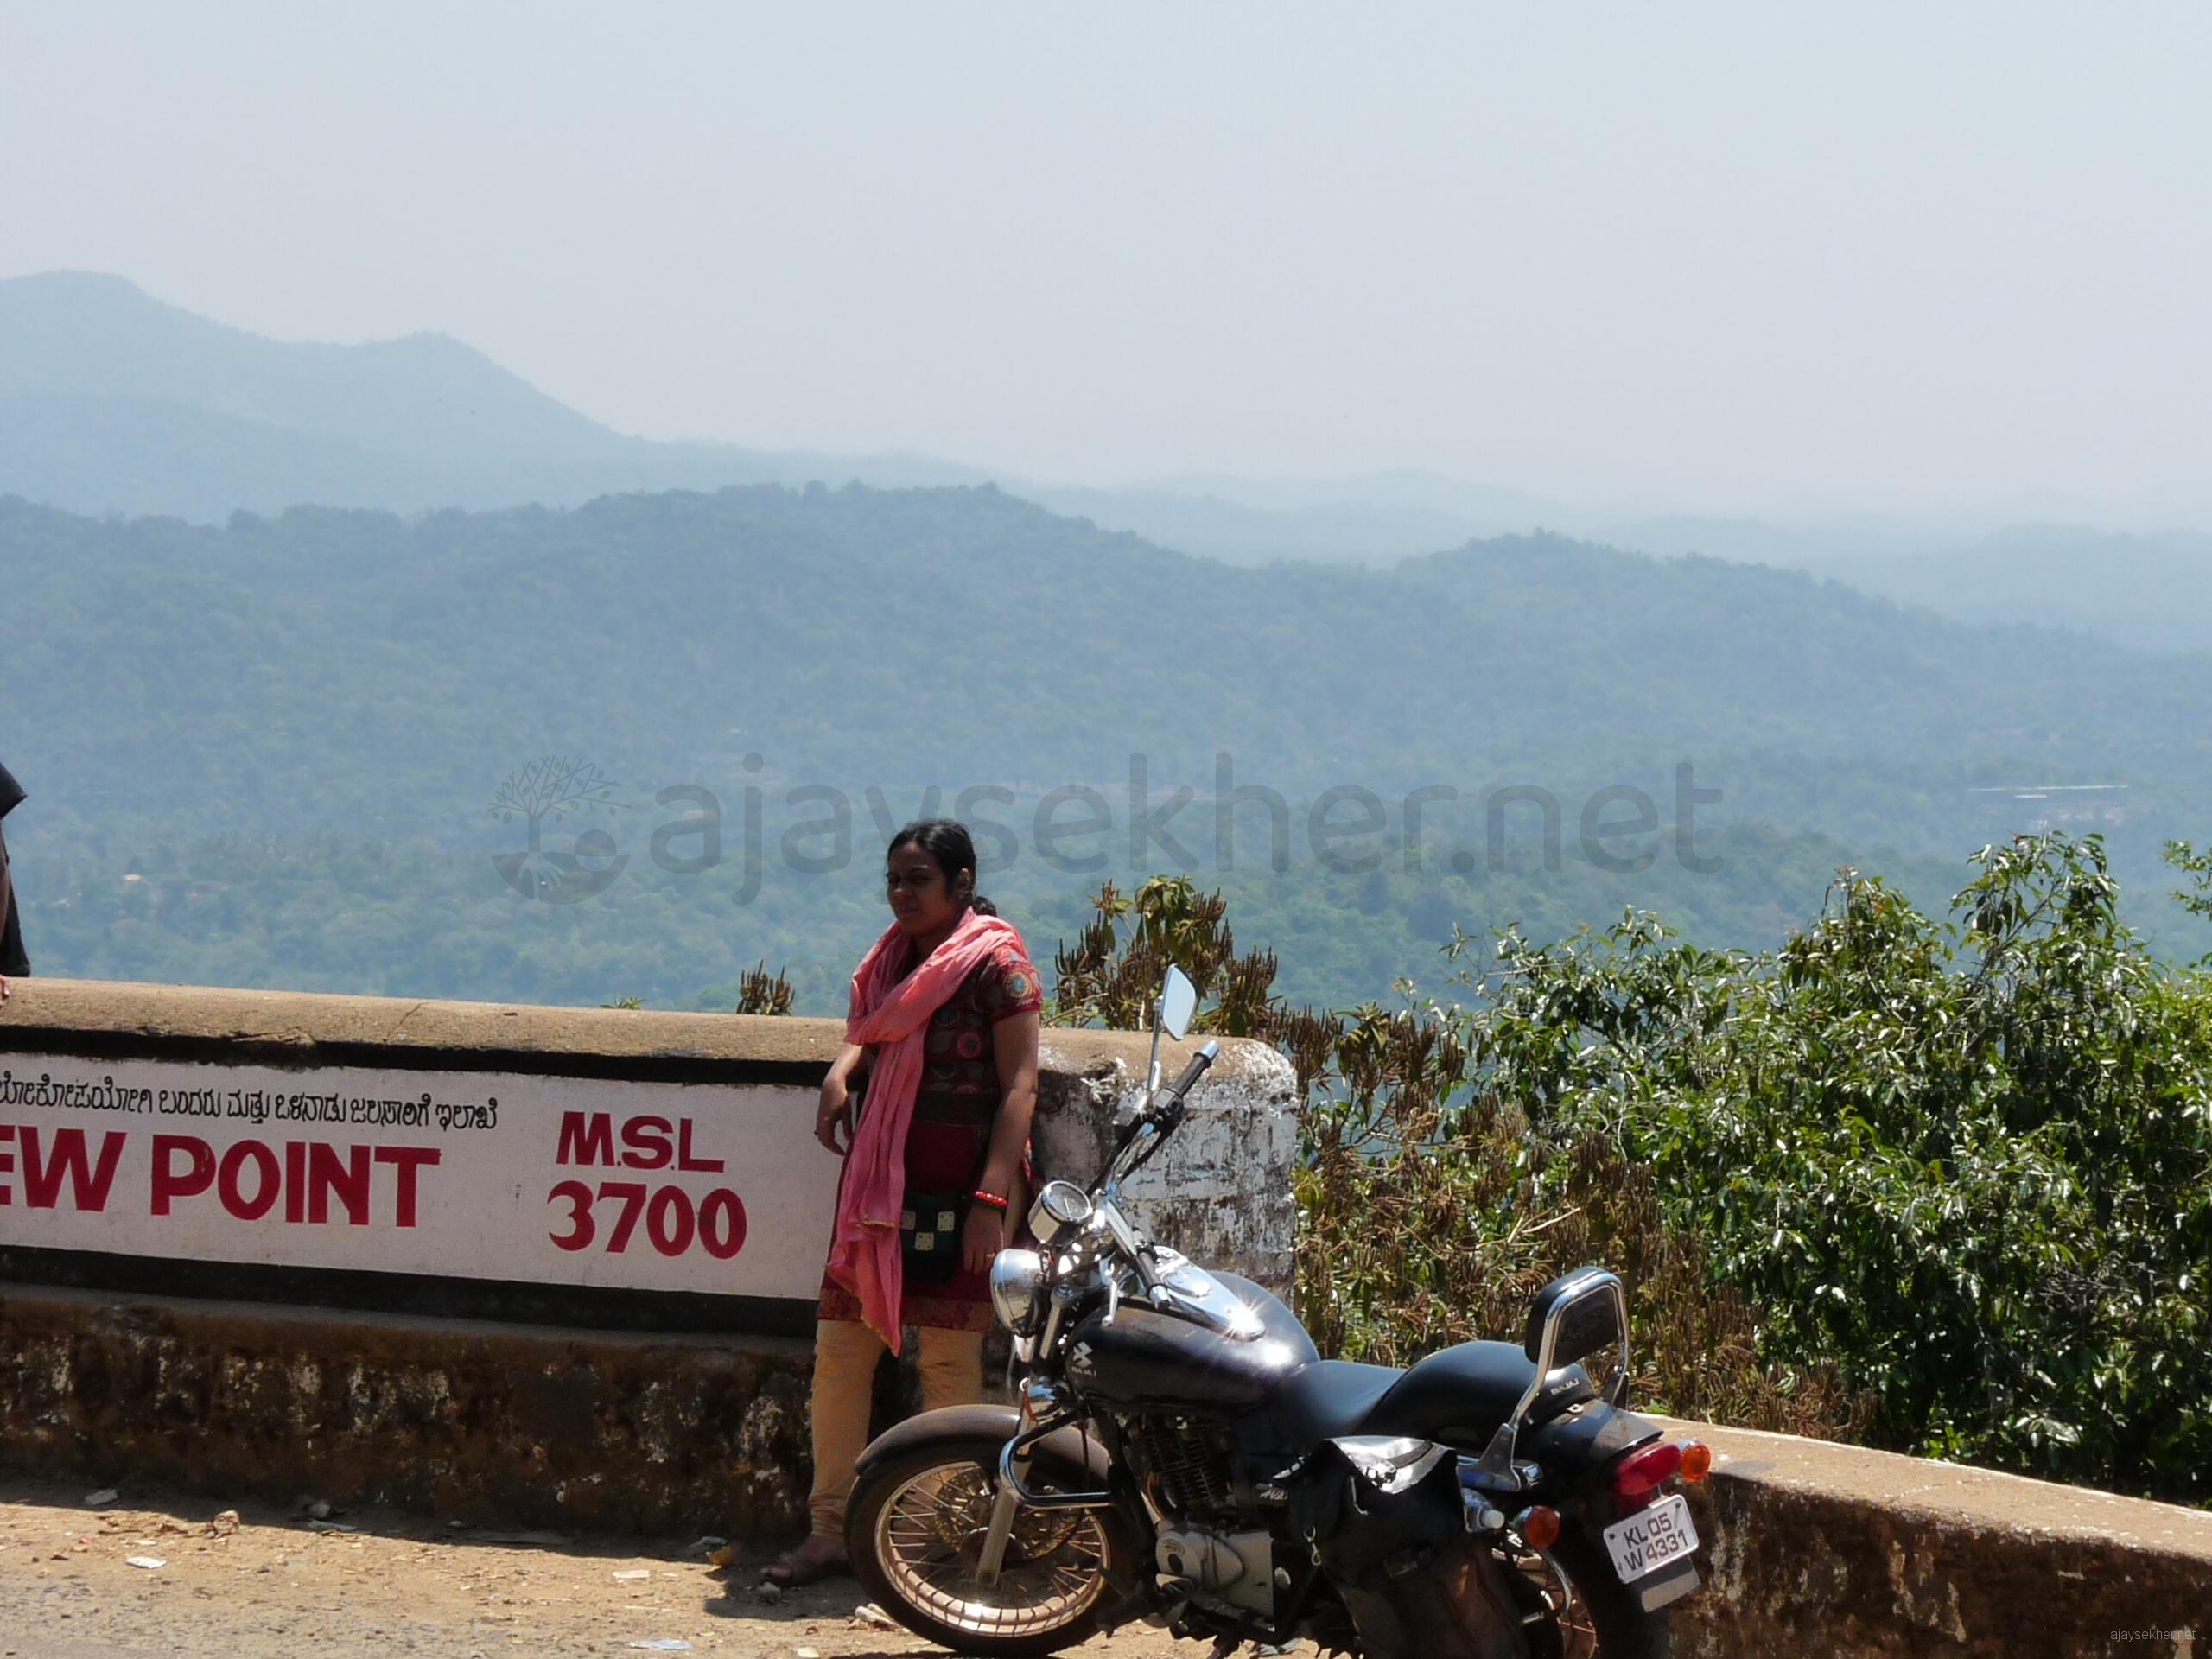 On the way to Talakavery: Jaime at 3700 MSL in Coorg.  Bhagamandala and Madikeri in backdrop